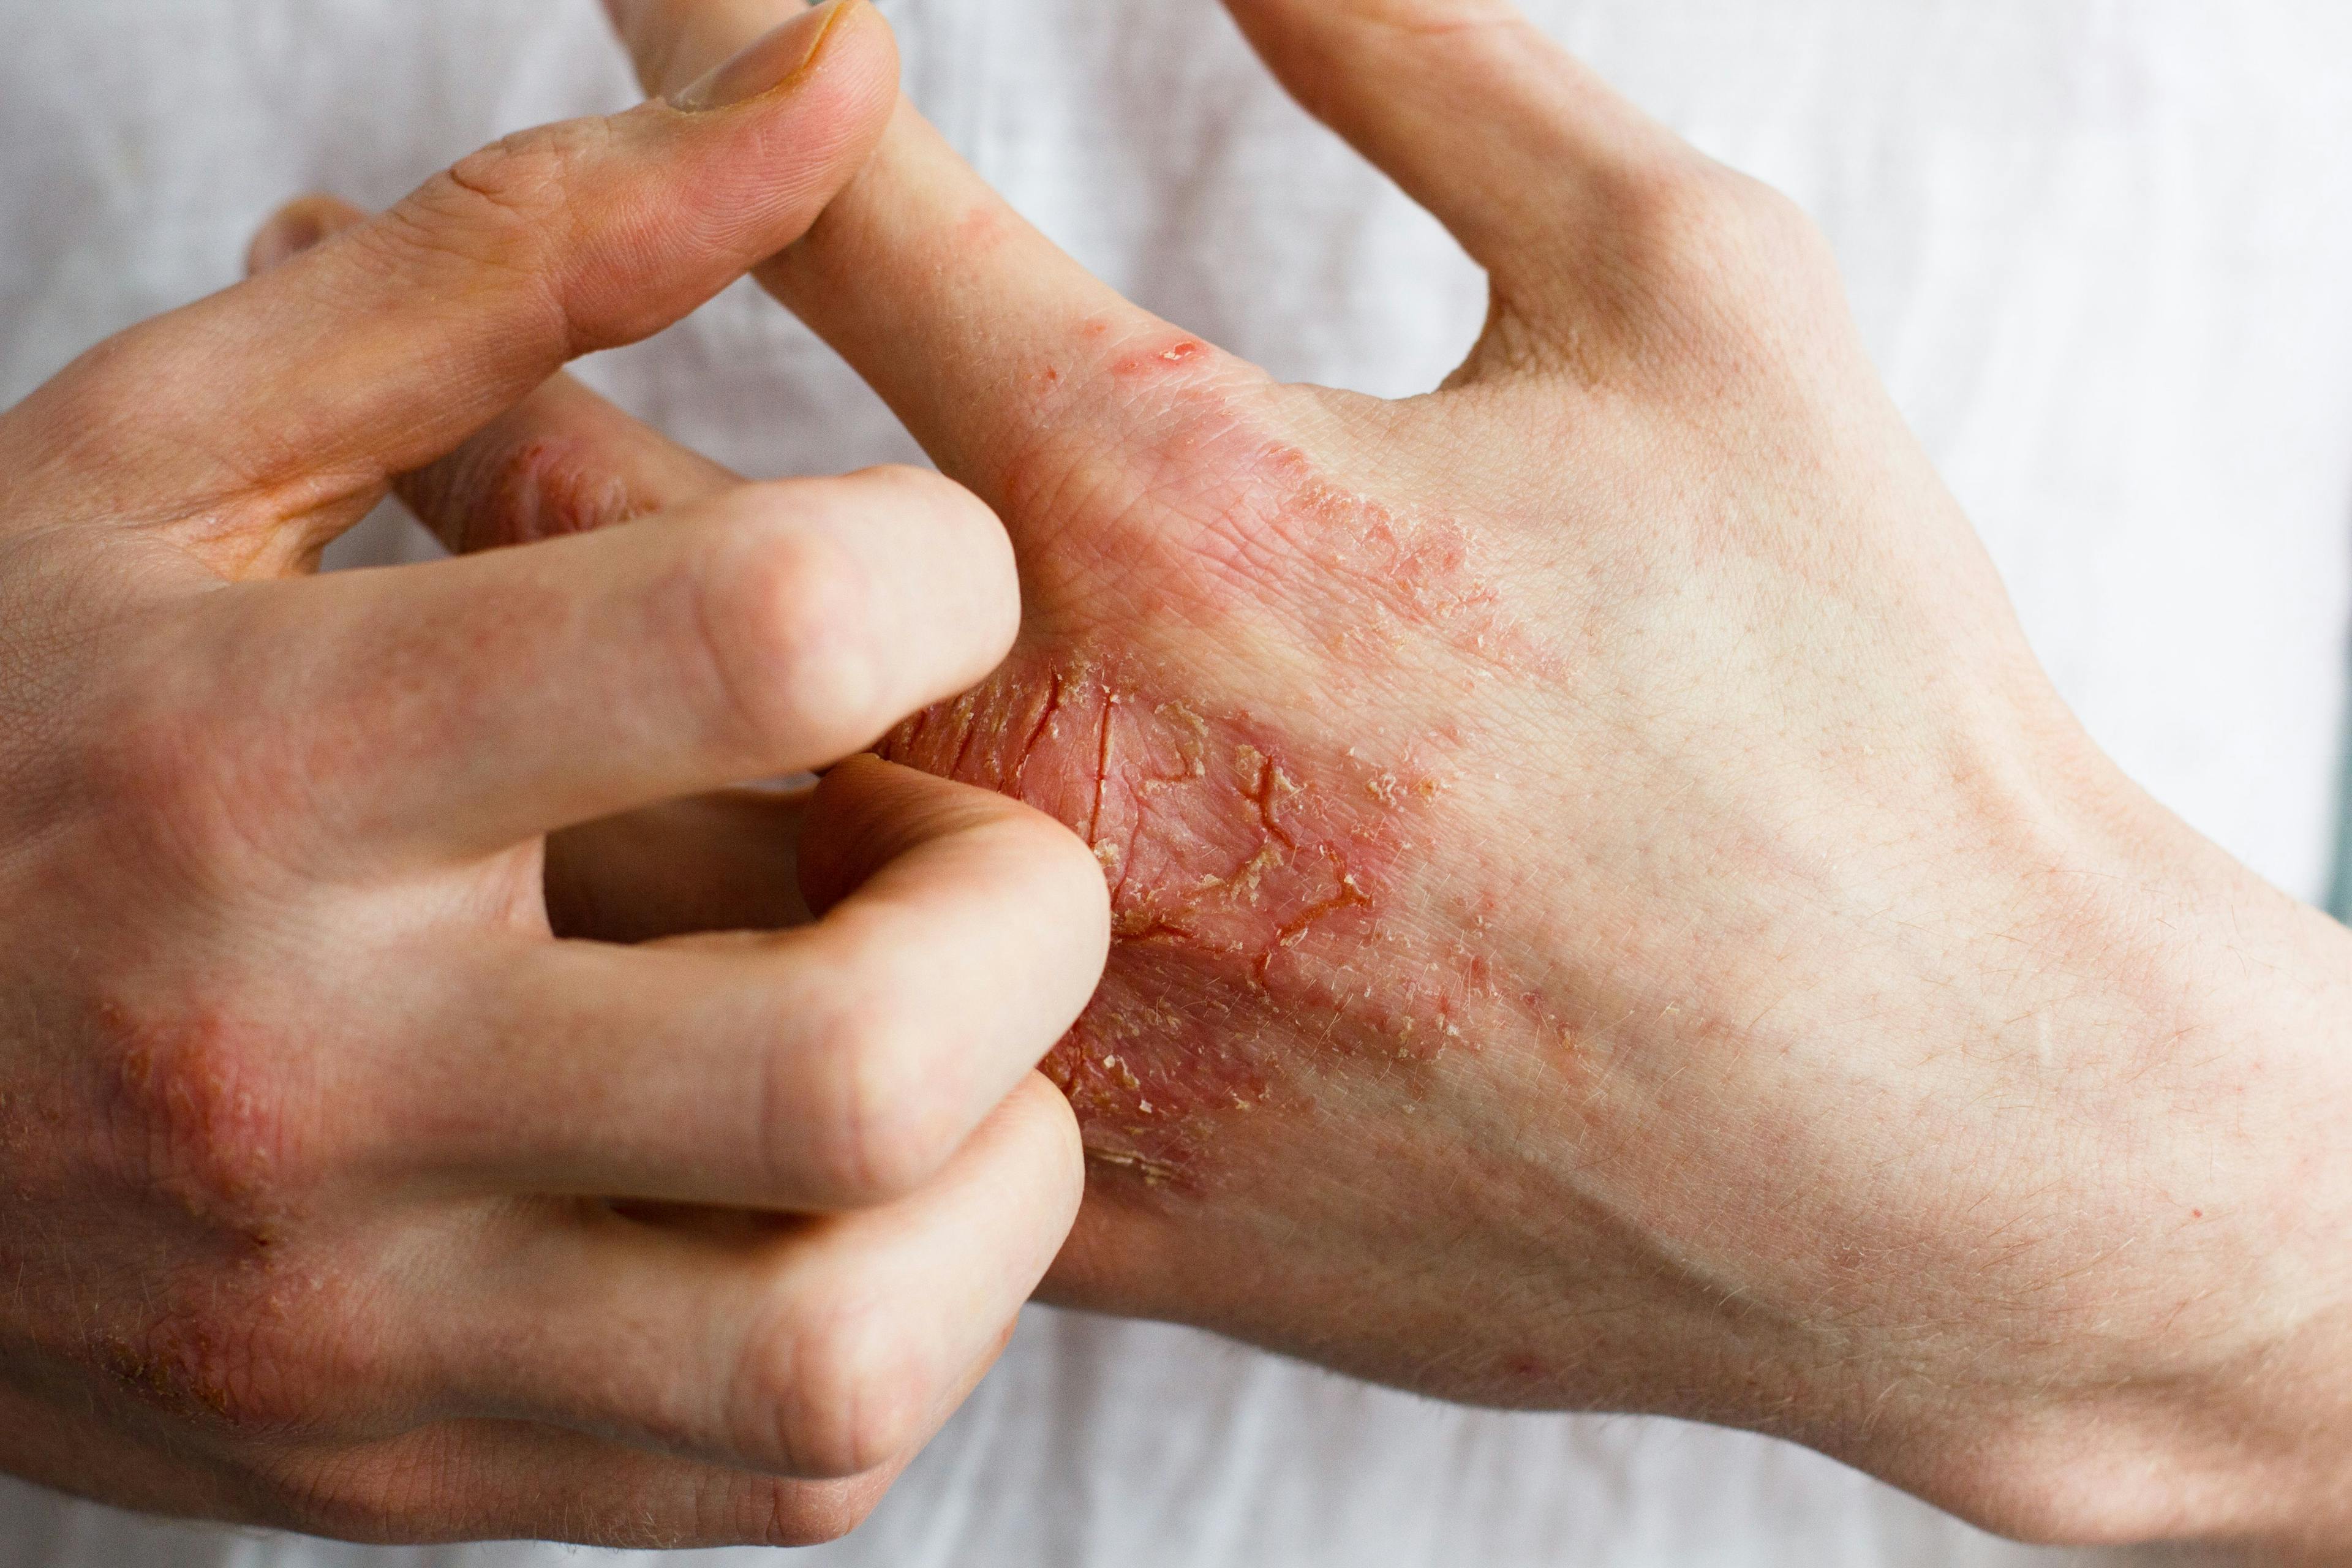 Experts: The Impact of Plaque Psoriasis, Atopic Dermatitis on Patients’ Quality of Life